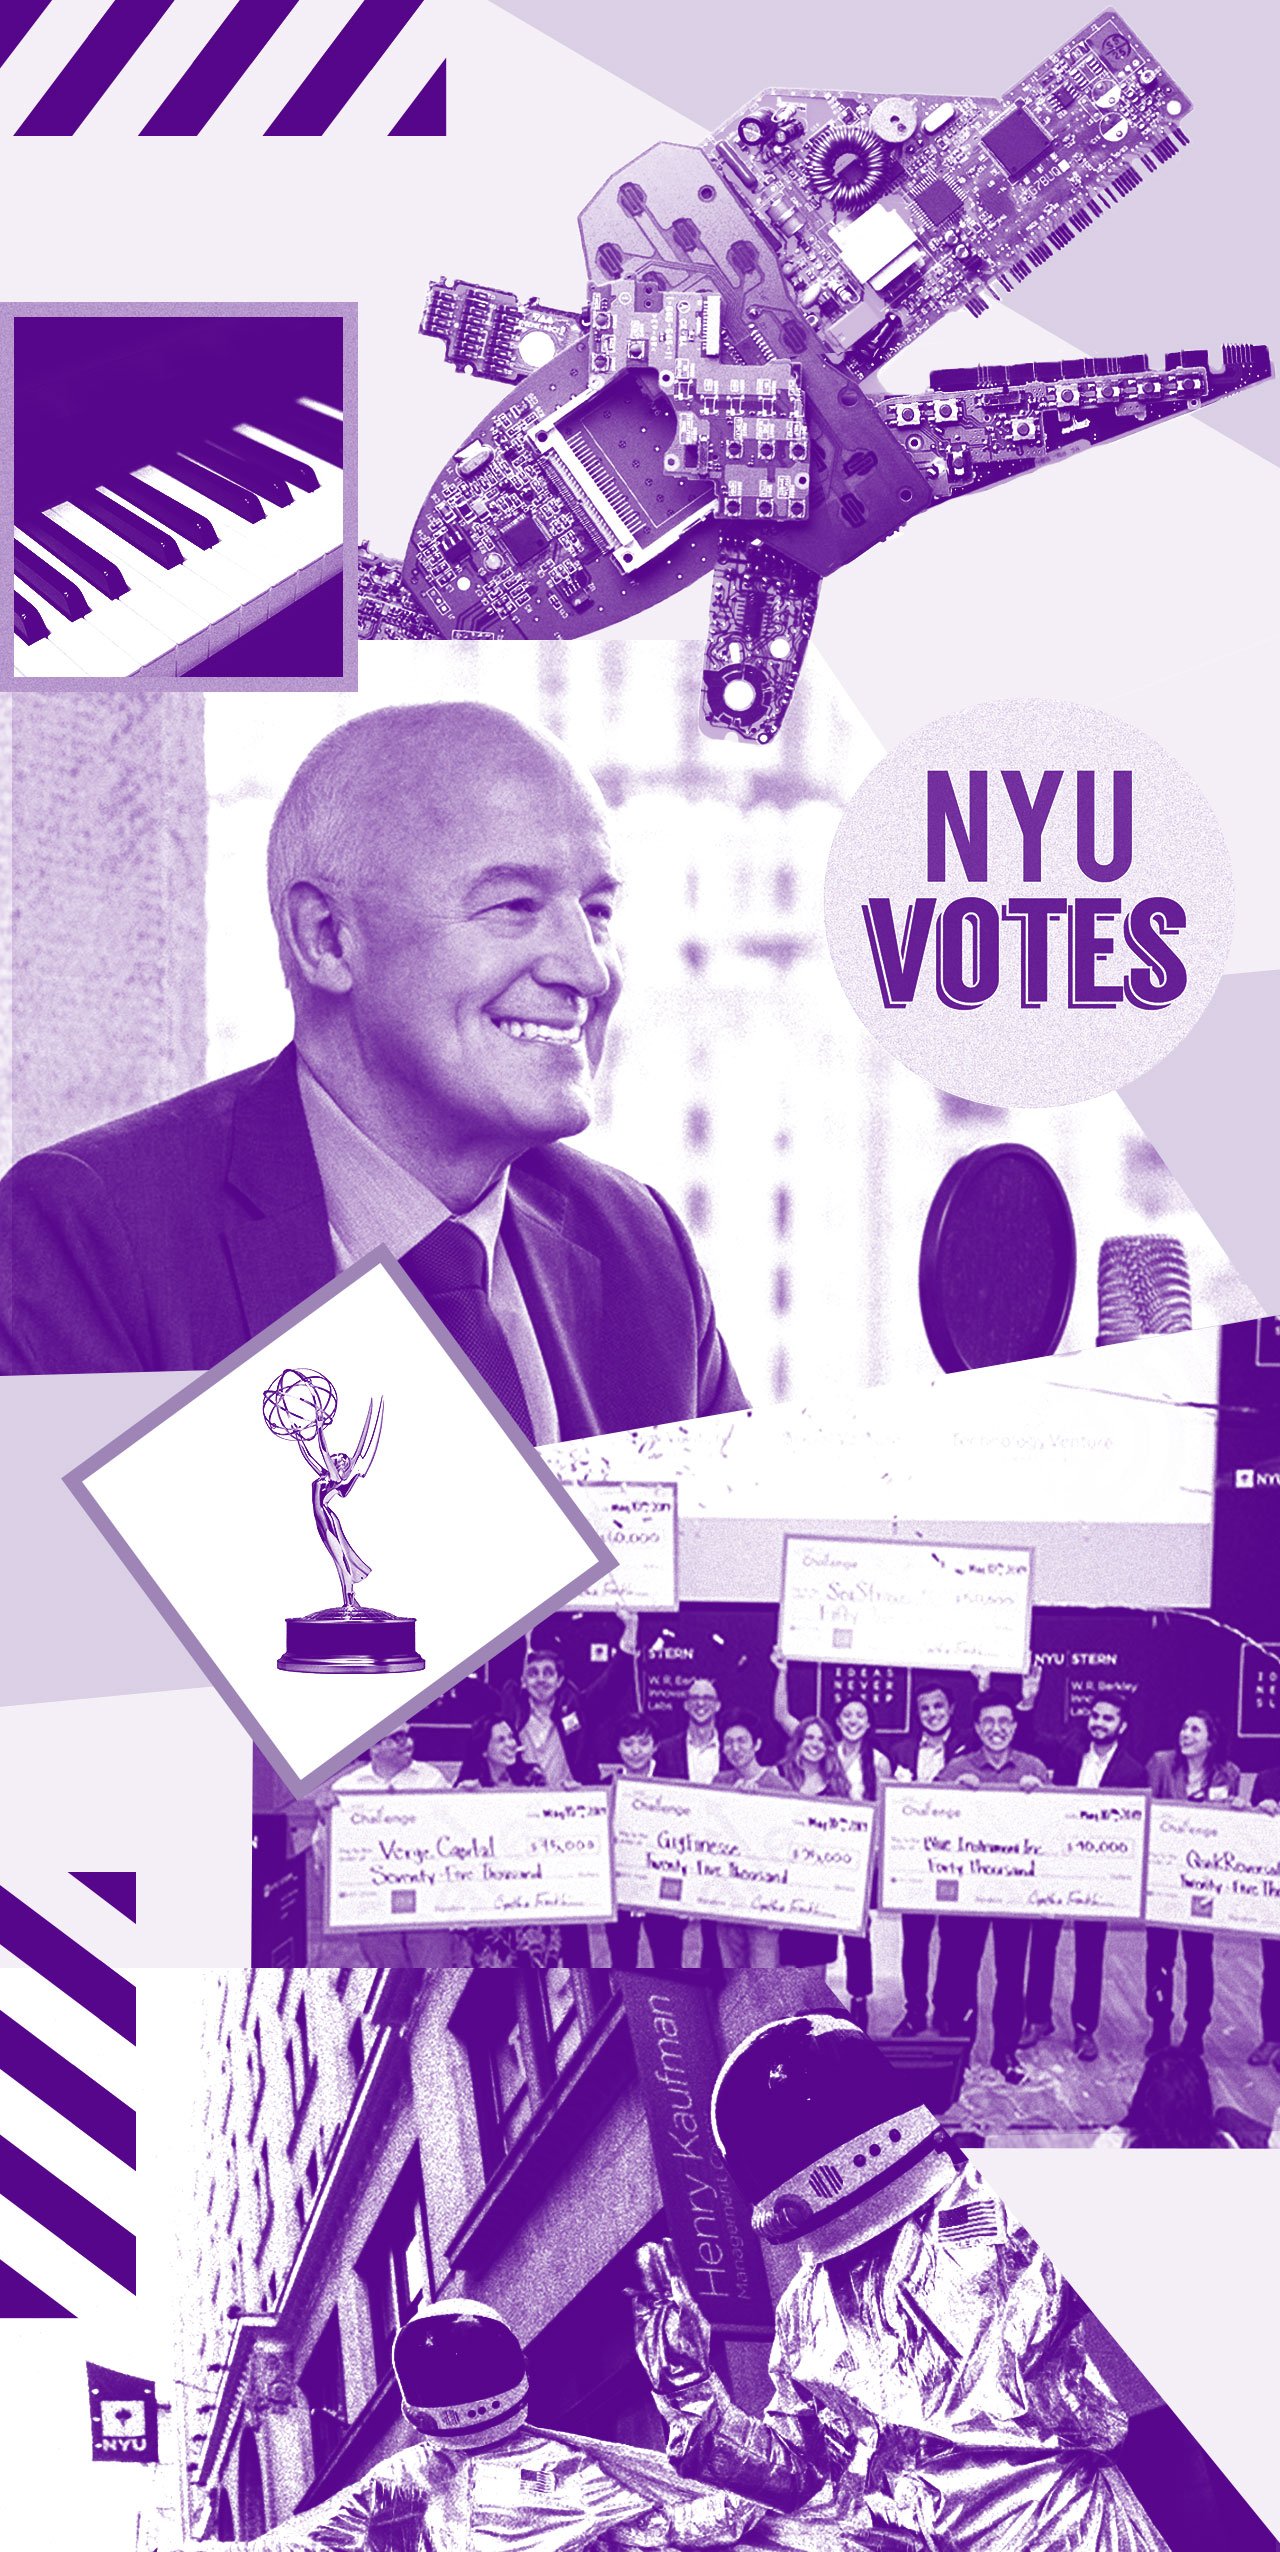 A collage of the NYU Monthly Roundup. Image one: A close-up of piano keys. Image two: A fish made out of computer hardware parts. Image three: President Andy Hamilton smiling in front of a microphone. Image four: NYU votes logo. Image five: an Emmy award. Image six: A group of students holding large checks reflecting the award they won. Image seven: Two people in astronaut Halloween costumes.